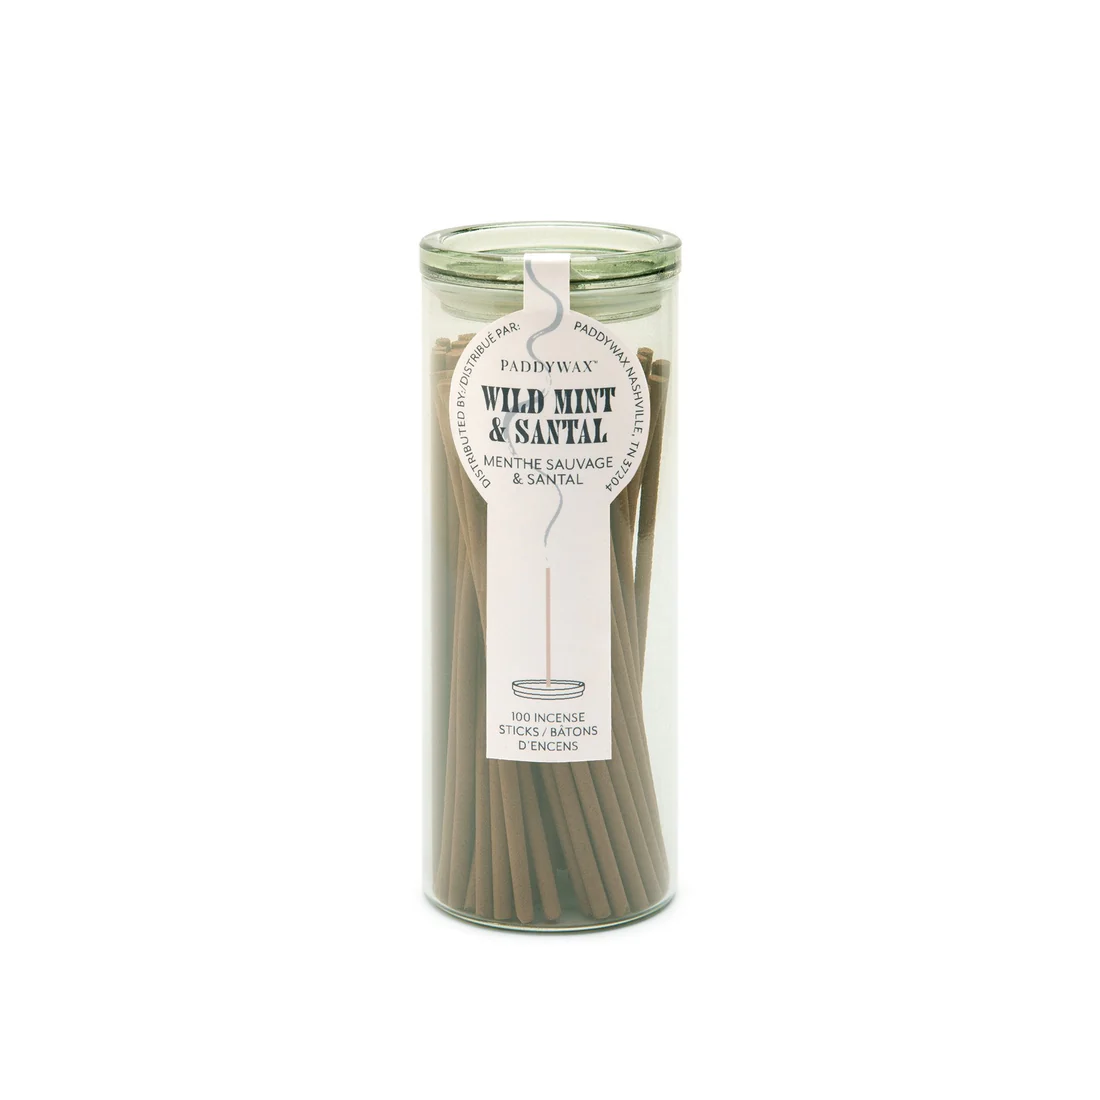 paddy-wax-incense-sticks-and-holder-wild-mint-and-santal